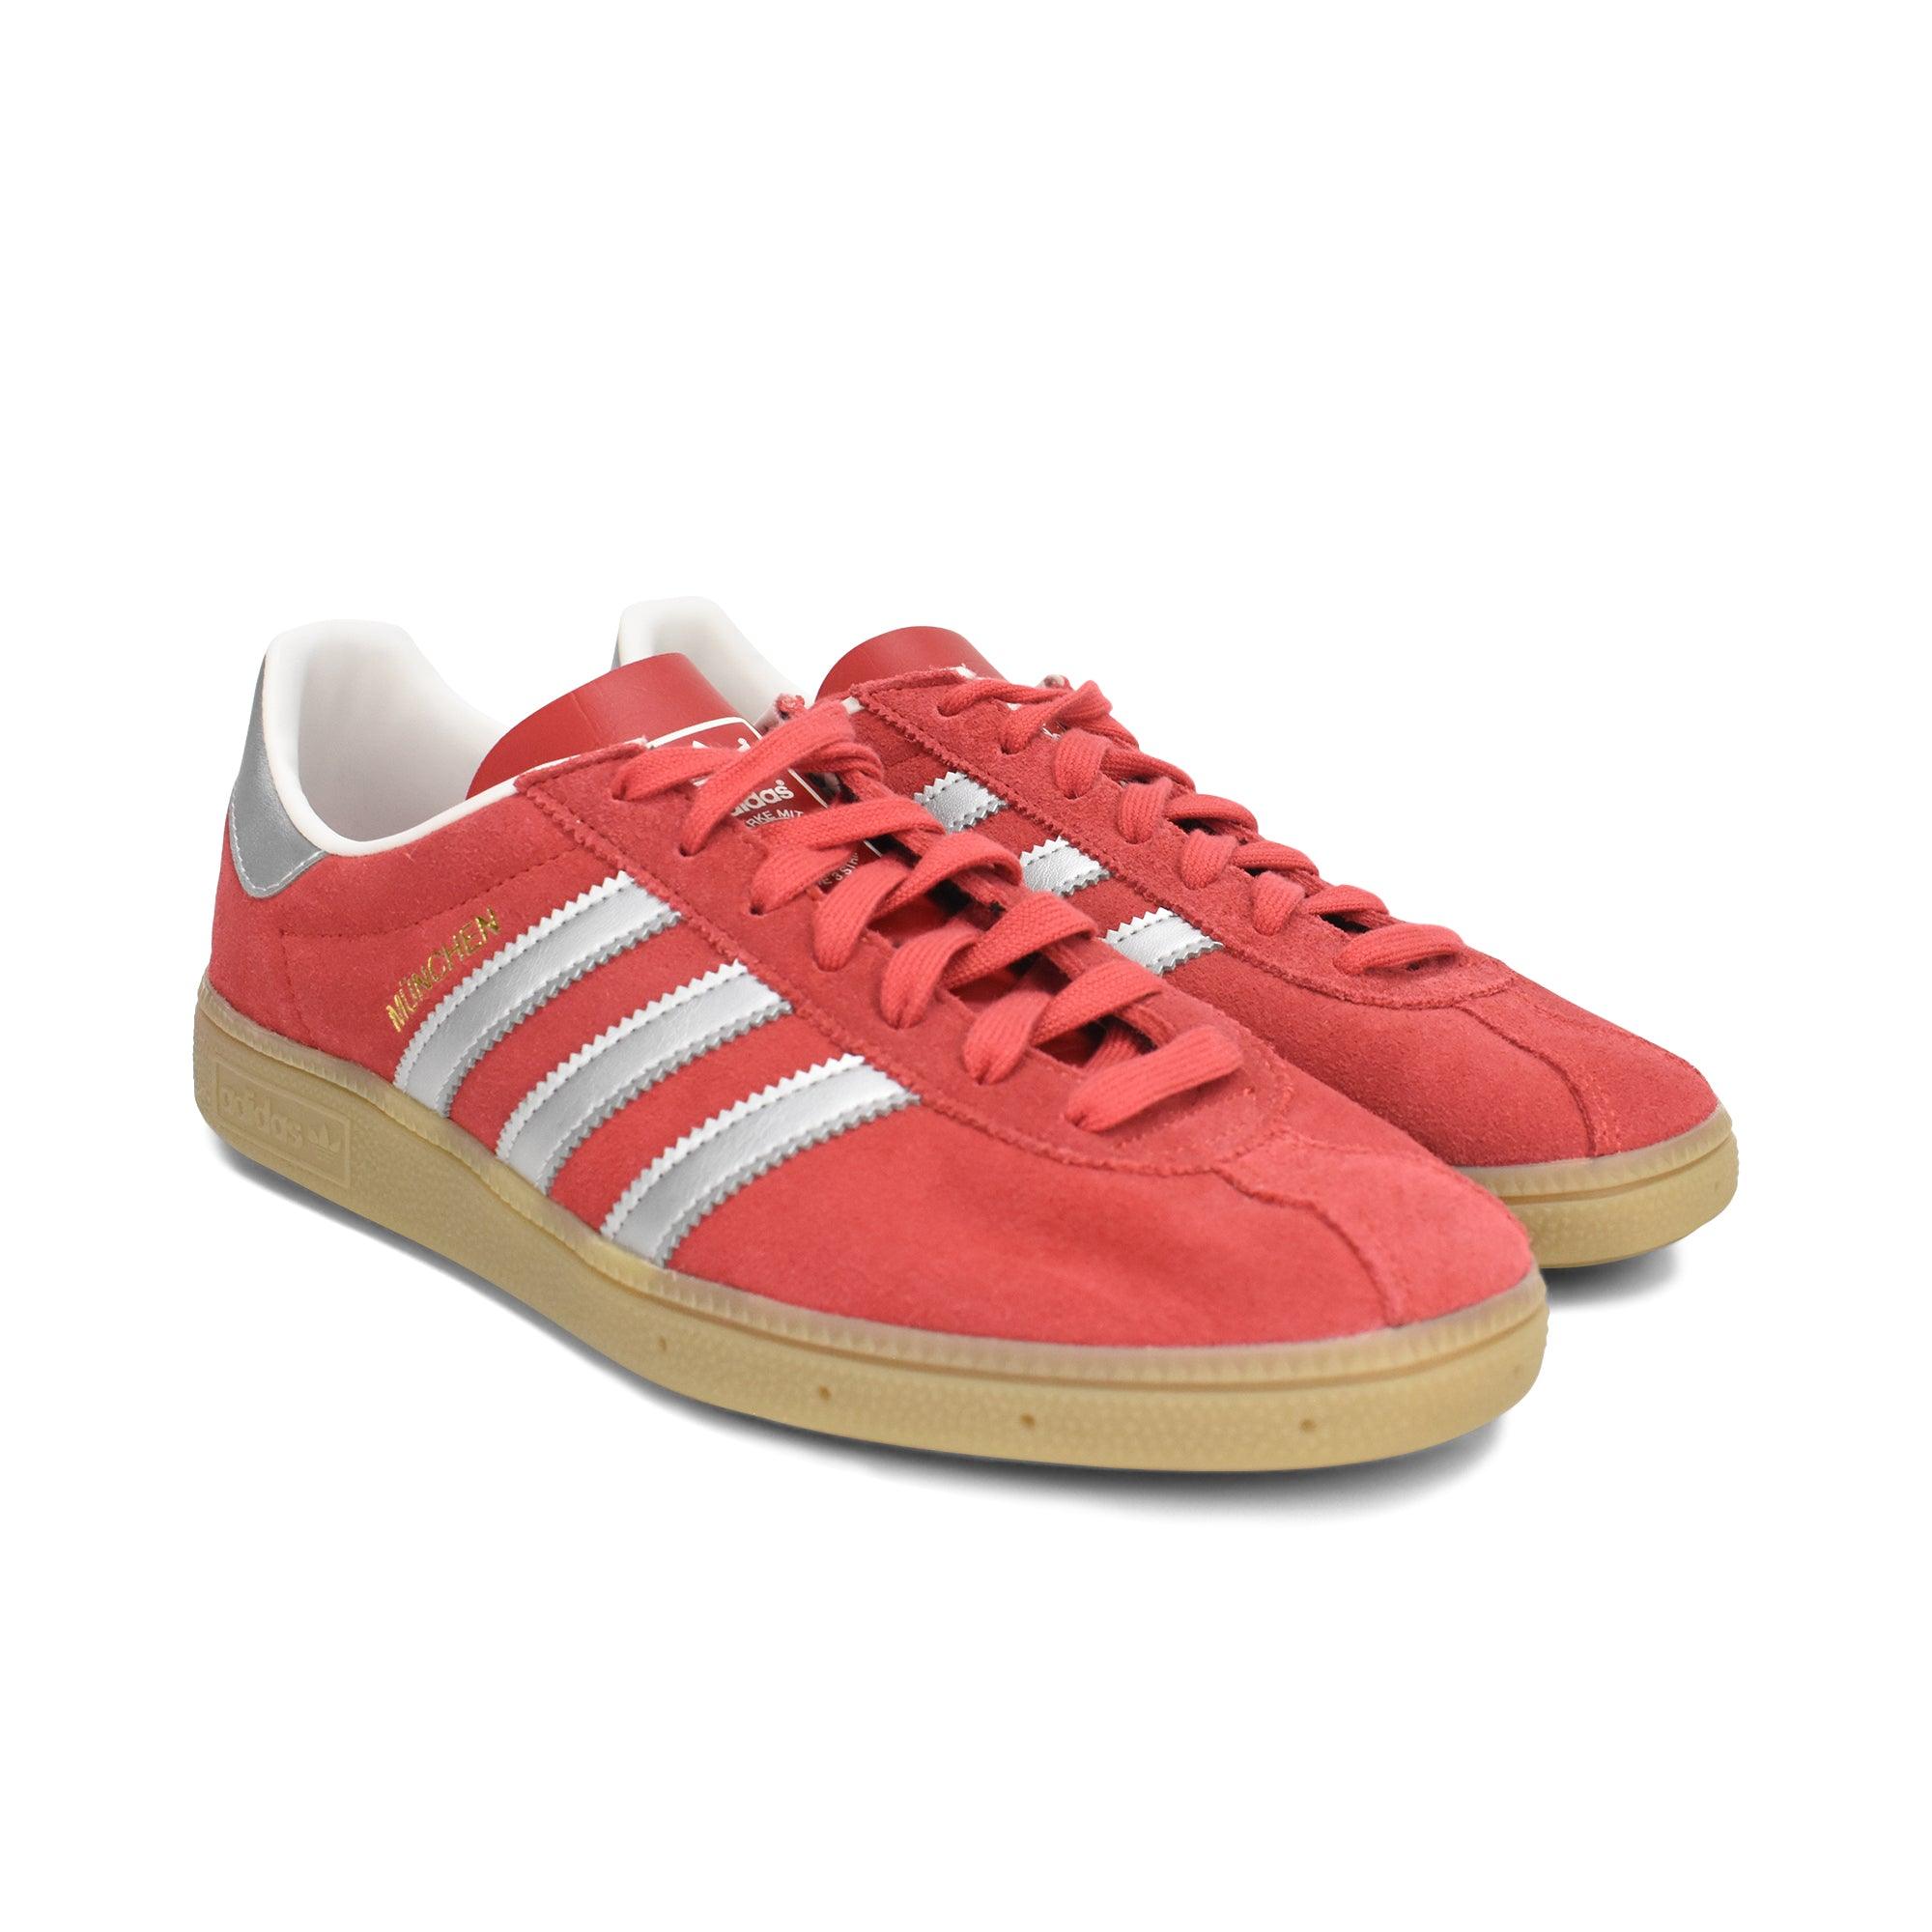 Adidas 'Gazelle' Sneakers - Men's 42.5 - Fashionably Yours